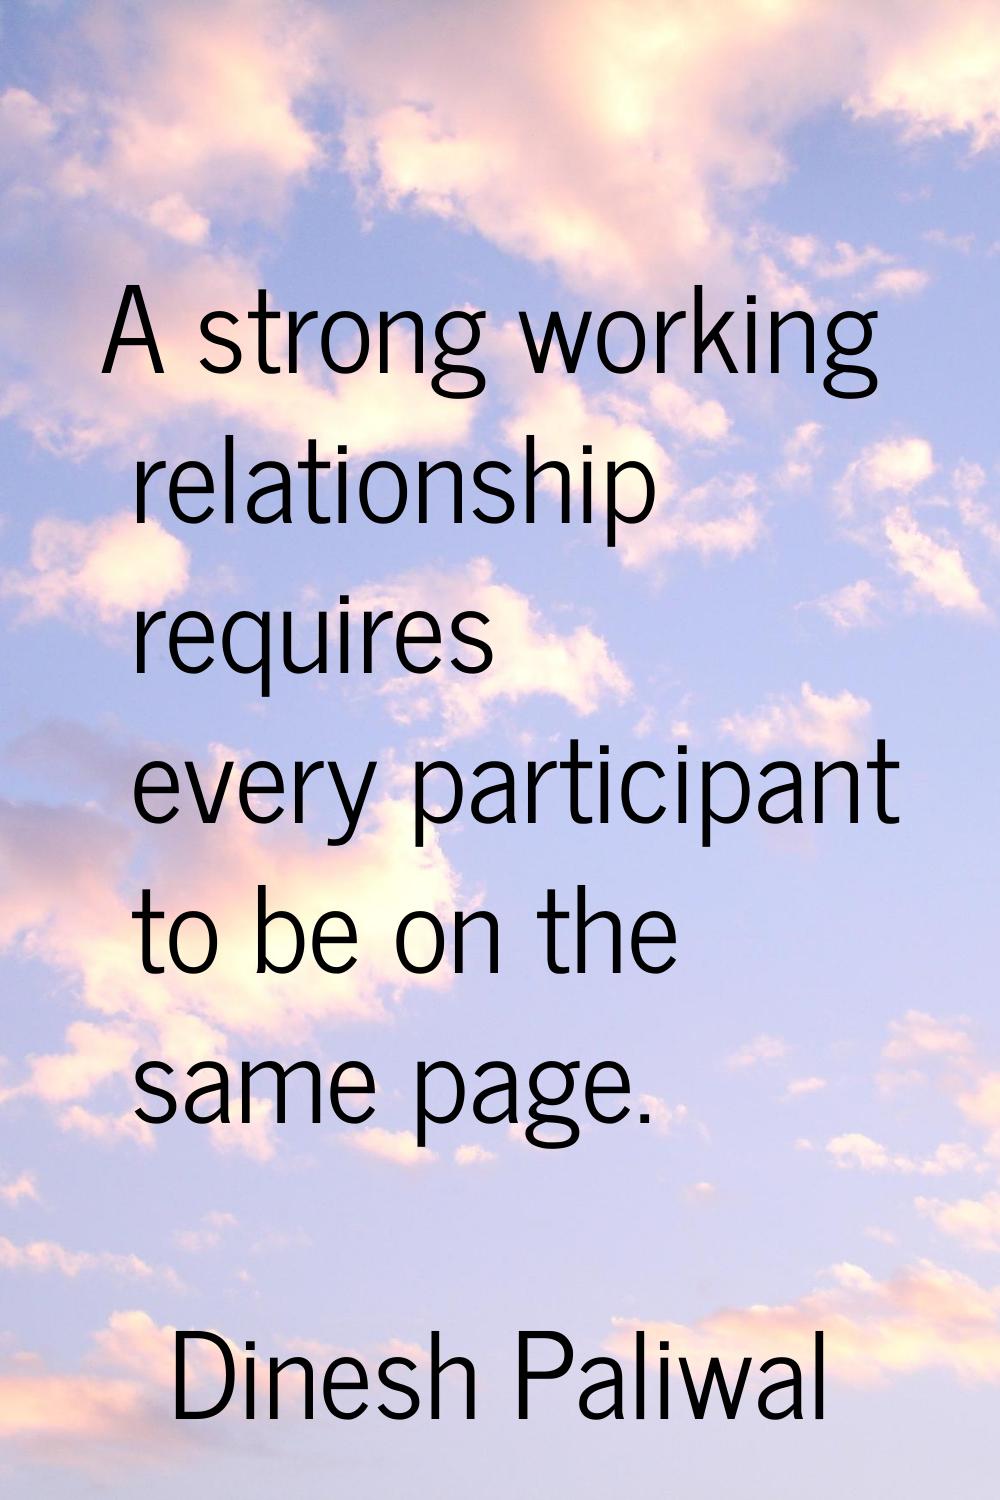 A strong working relationship requires every participant to be on the same page.